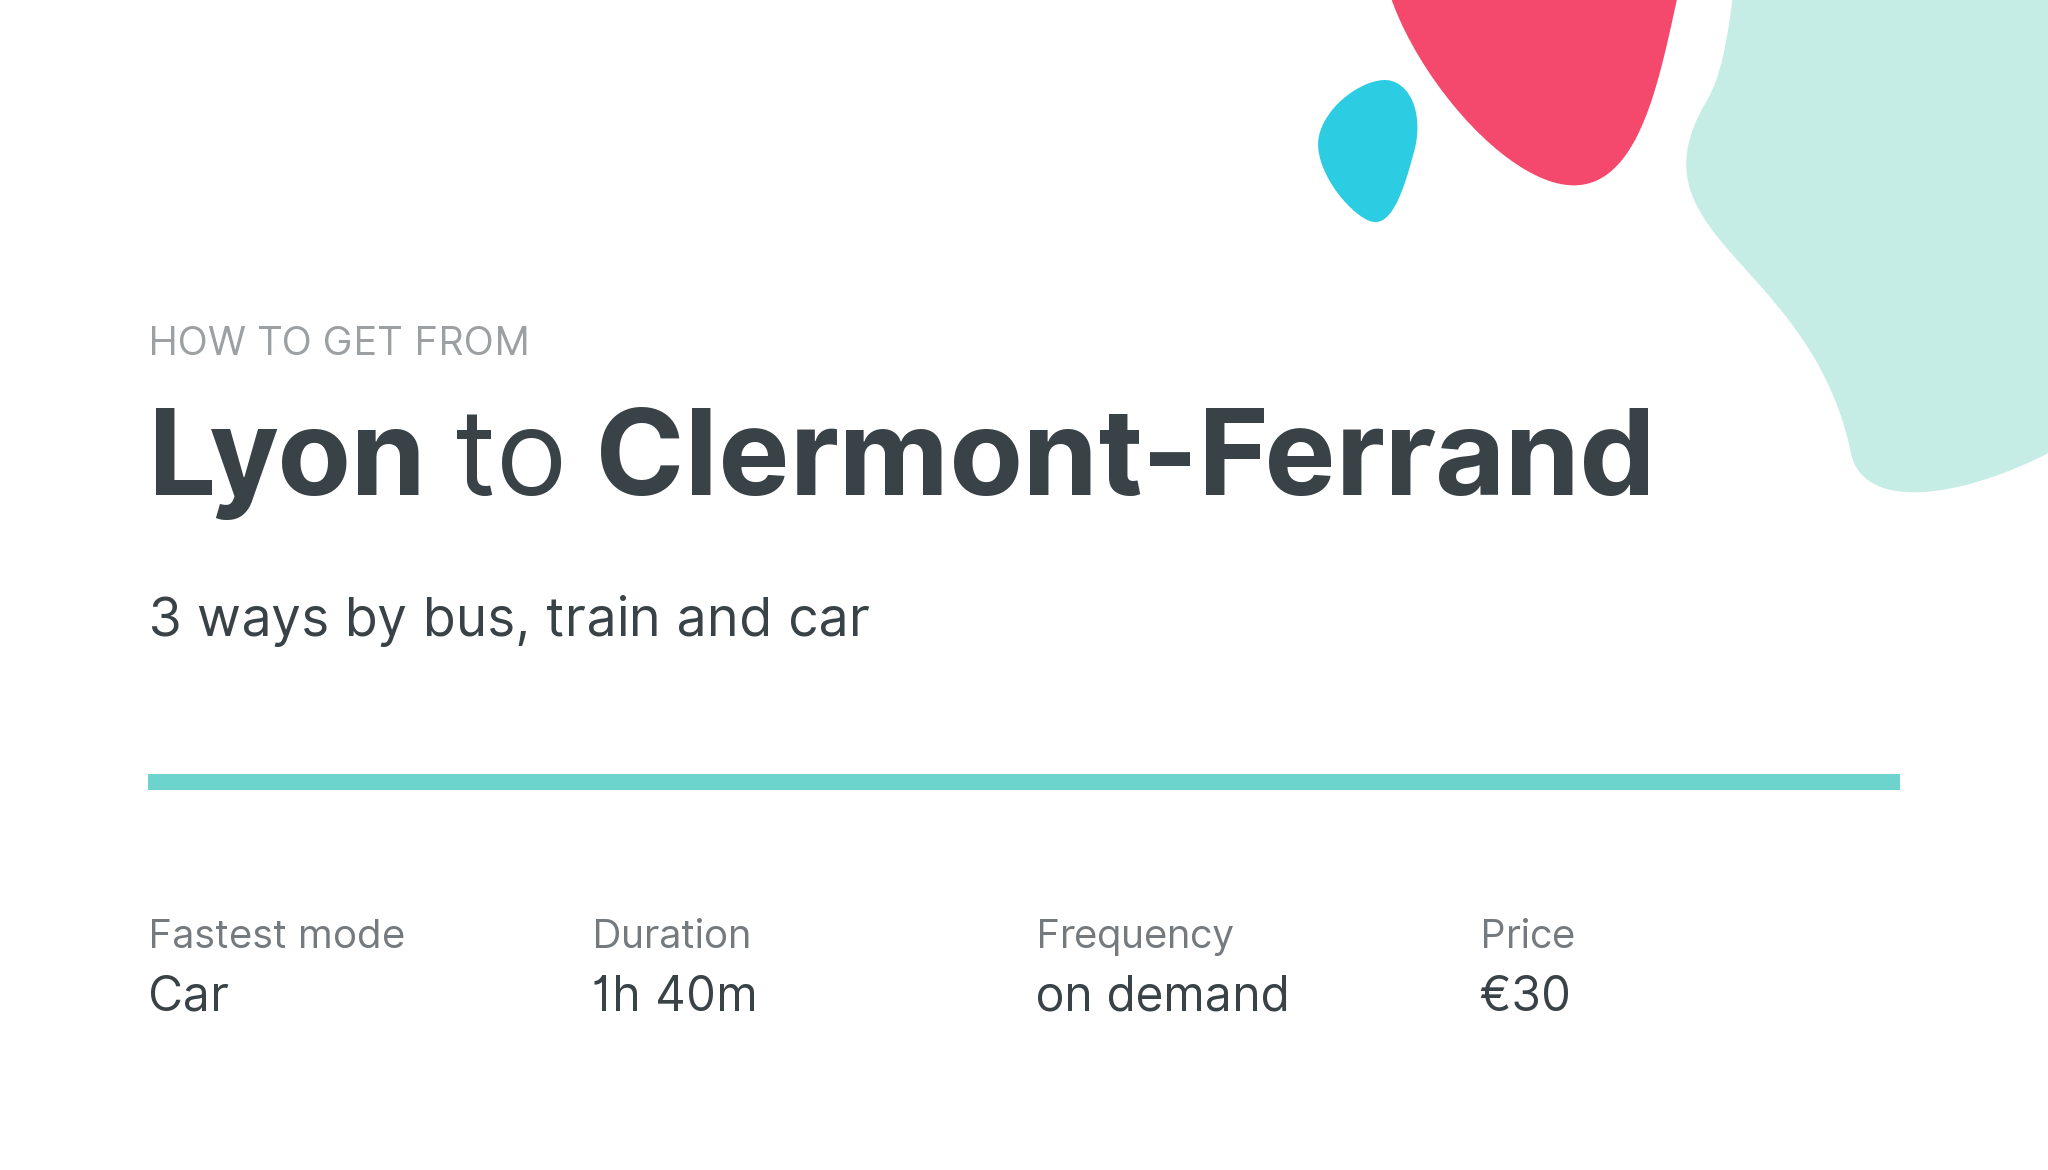 How do I get from Lyon to Clermont-Ferrand